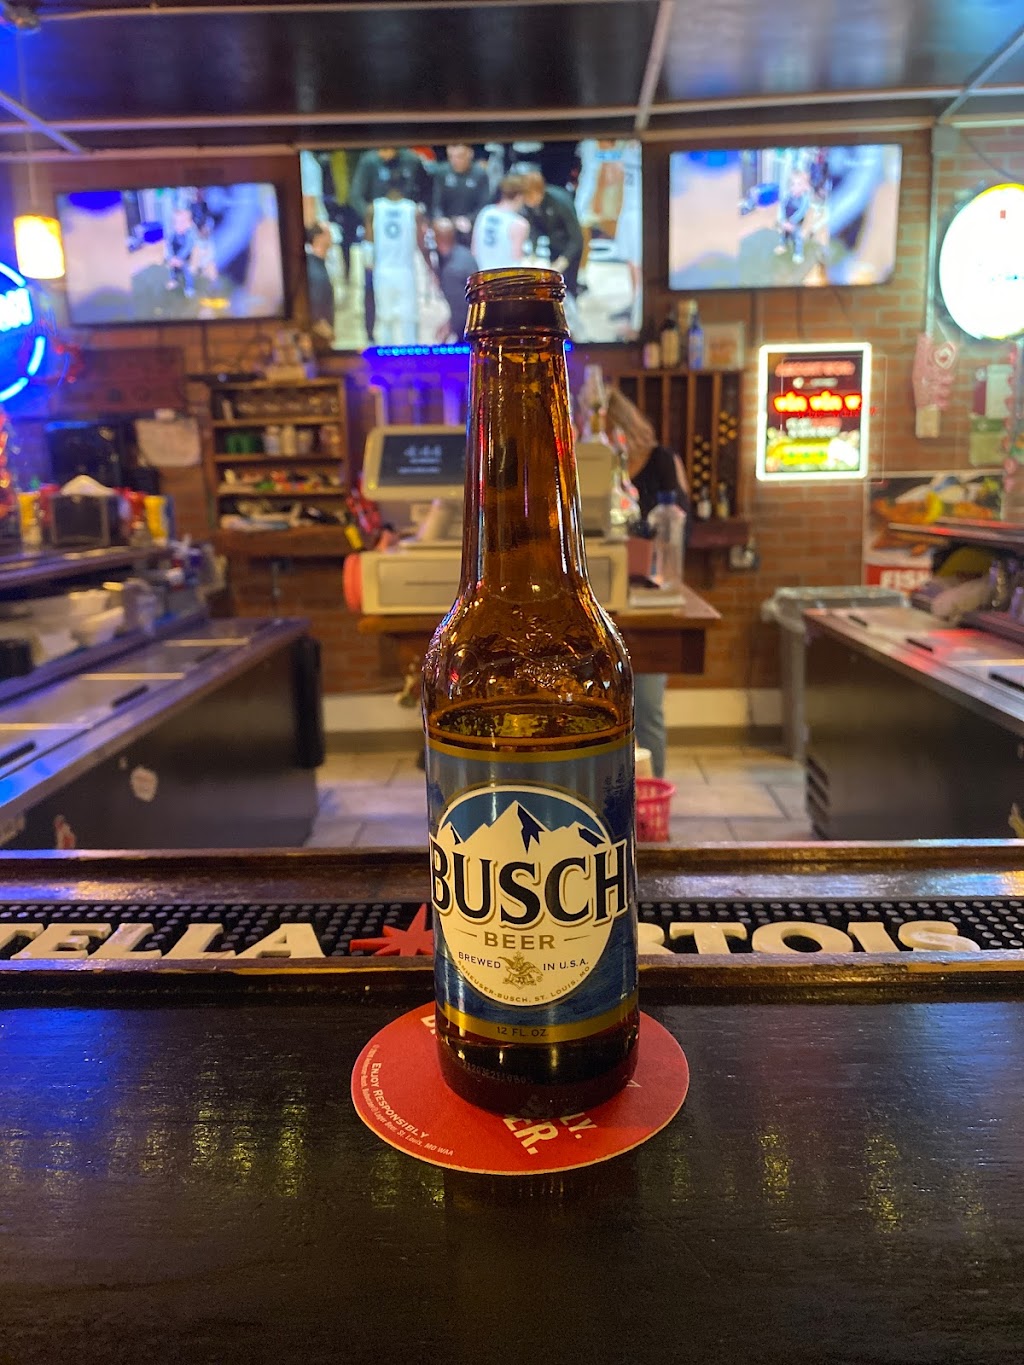 Unchs Bar & Grill | 103 Water St, Cahokia, IL 62206, USA | Phone: (618) 646-9700